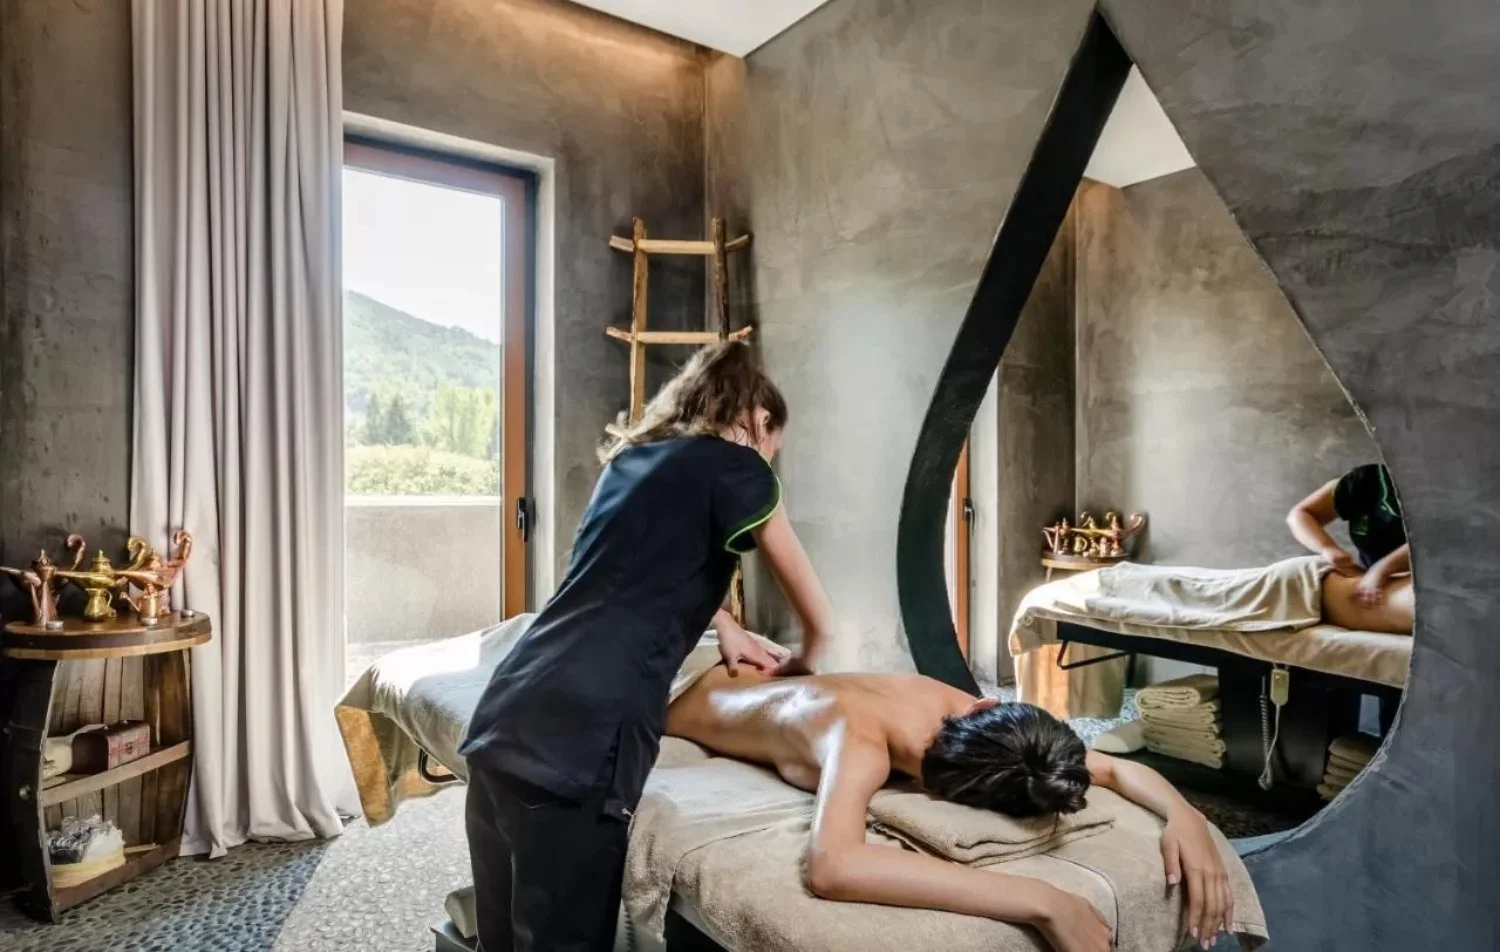 1 day massages and treatments, spa retreat sensations in coimbra, portugal411713268155.webp